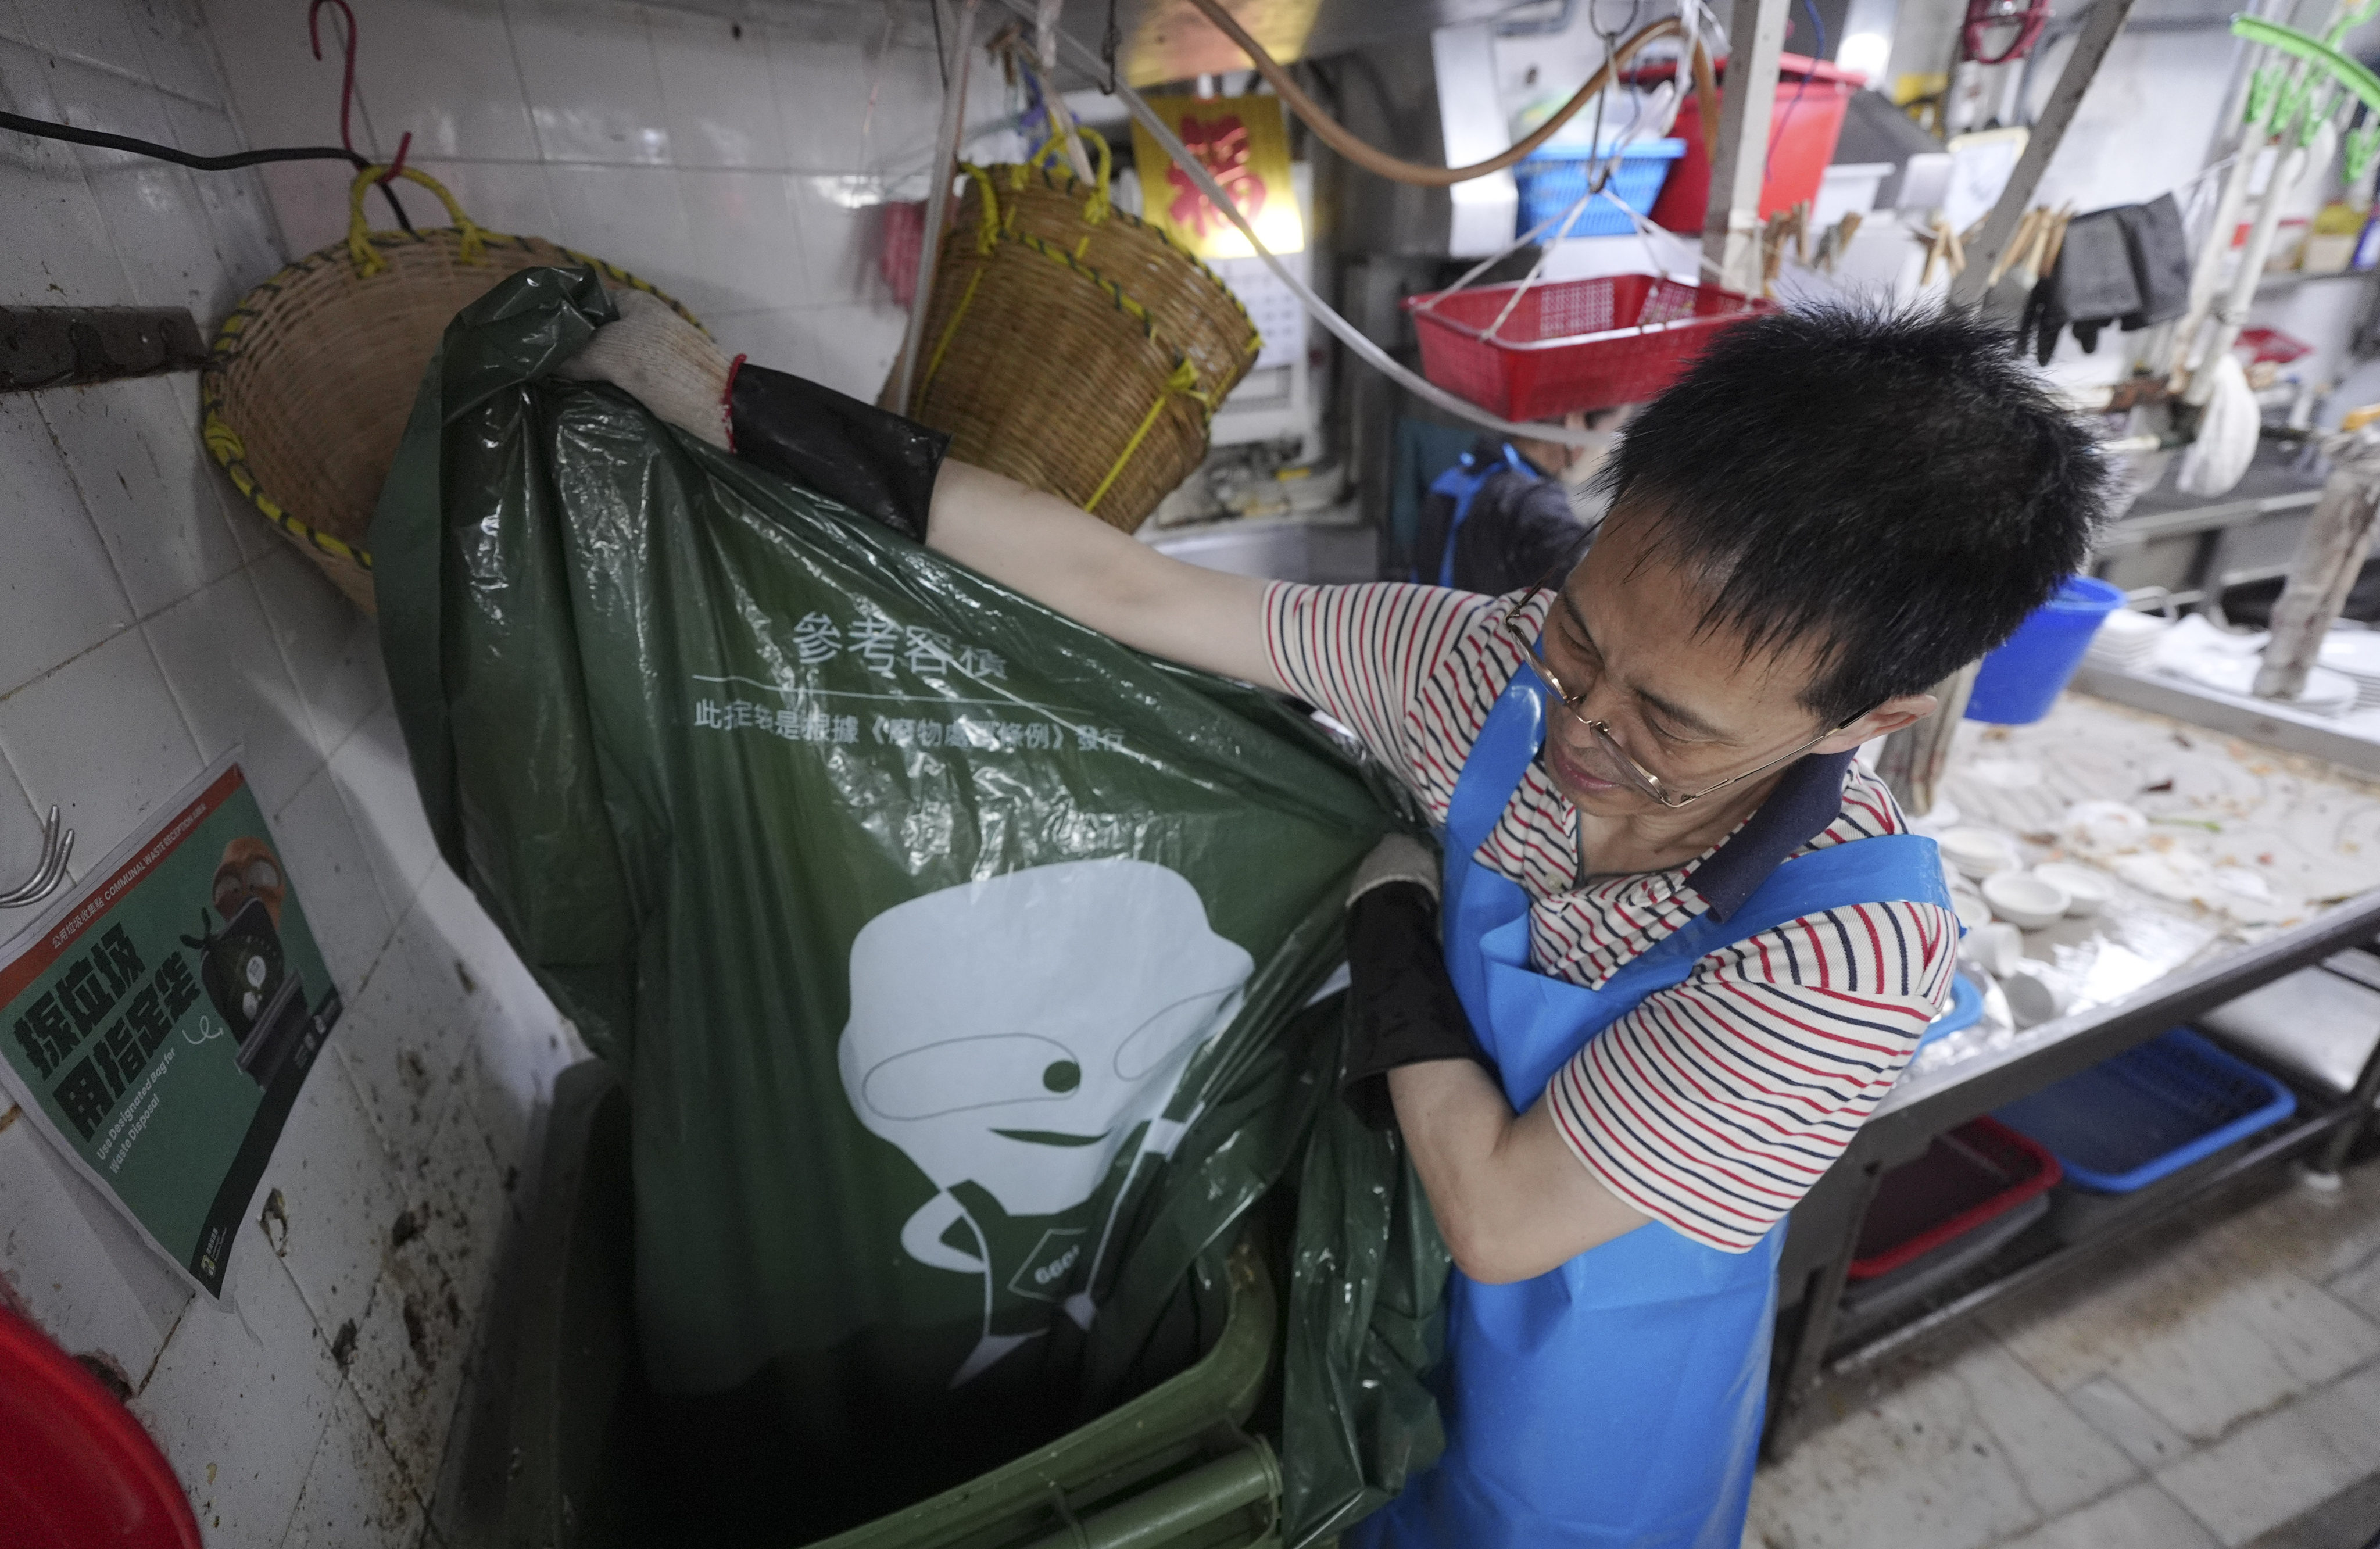 Hong Kong’s pay-as-you-throw scheme has been put on hold. Photo: Eugene Lee